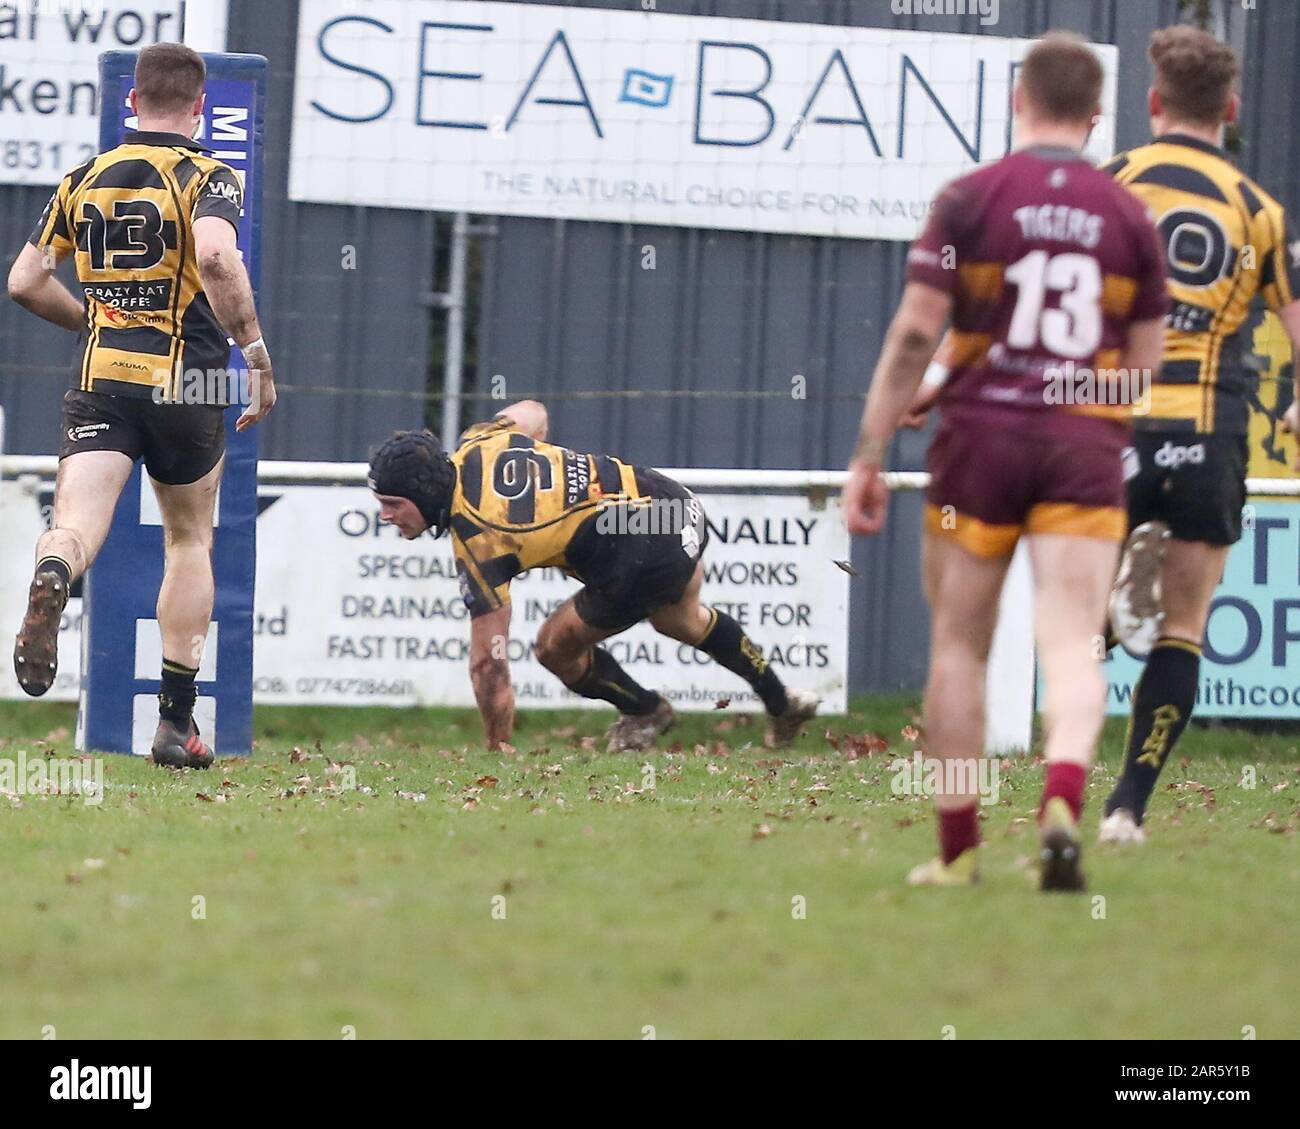 25.01.2020, Hinckley, Leicester, England. Rugby Union, Hinckley rfc v Sedgley Park rfc.   Ben Pointon scores a try for Hinckley during the RFU National League 2 North (NL2N) game played at the Leicester  Road Stadium. Stock Photo